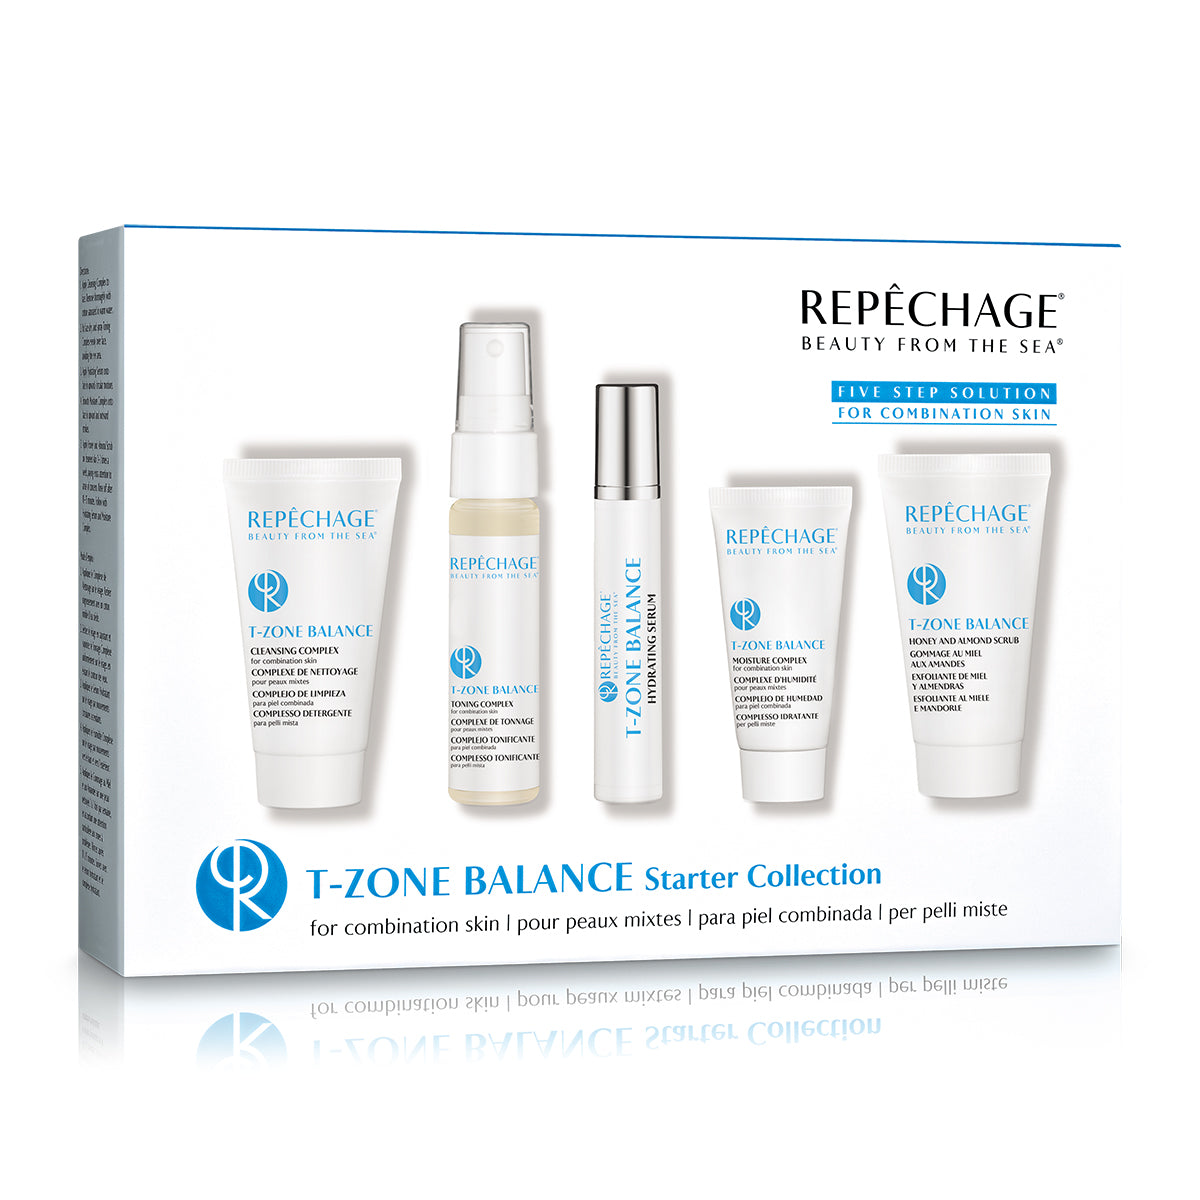 NEW T-Zone Balance Starter Collection for Combination Skin